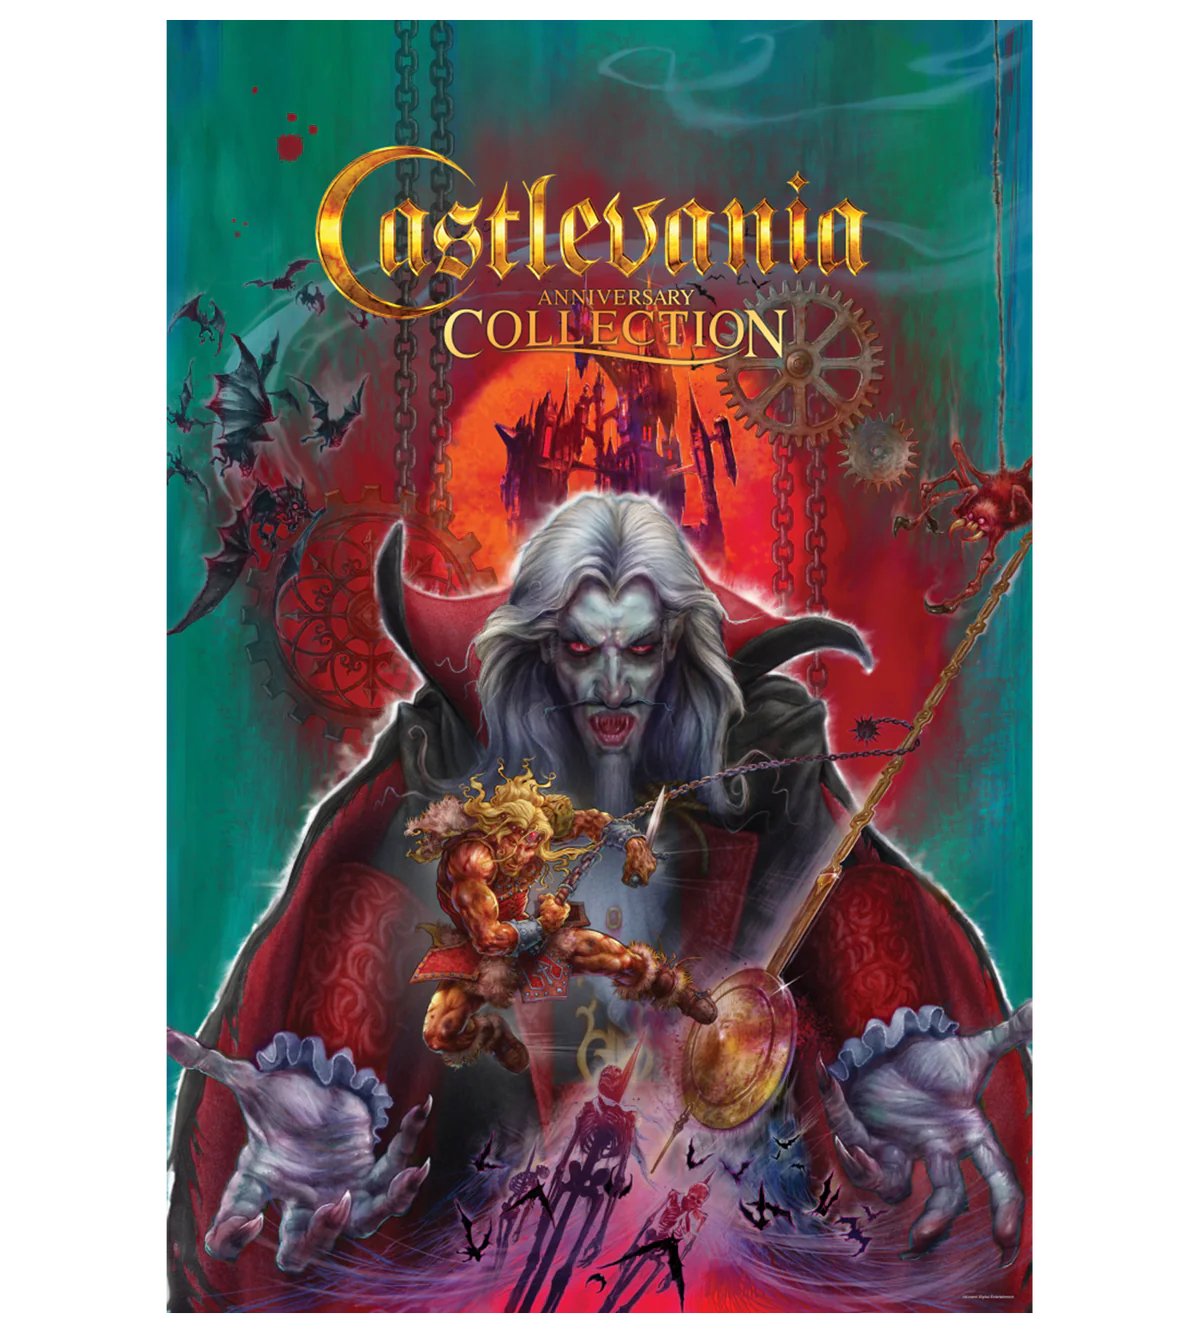 castlevania-anniversary-collection-poster_1200x.jpg